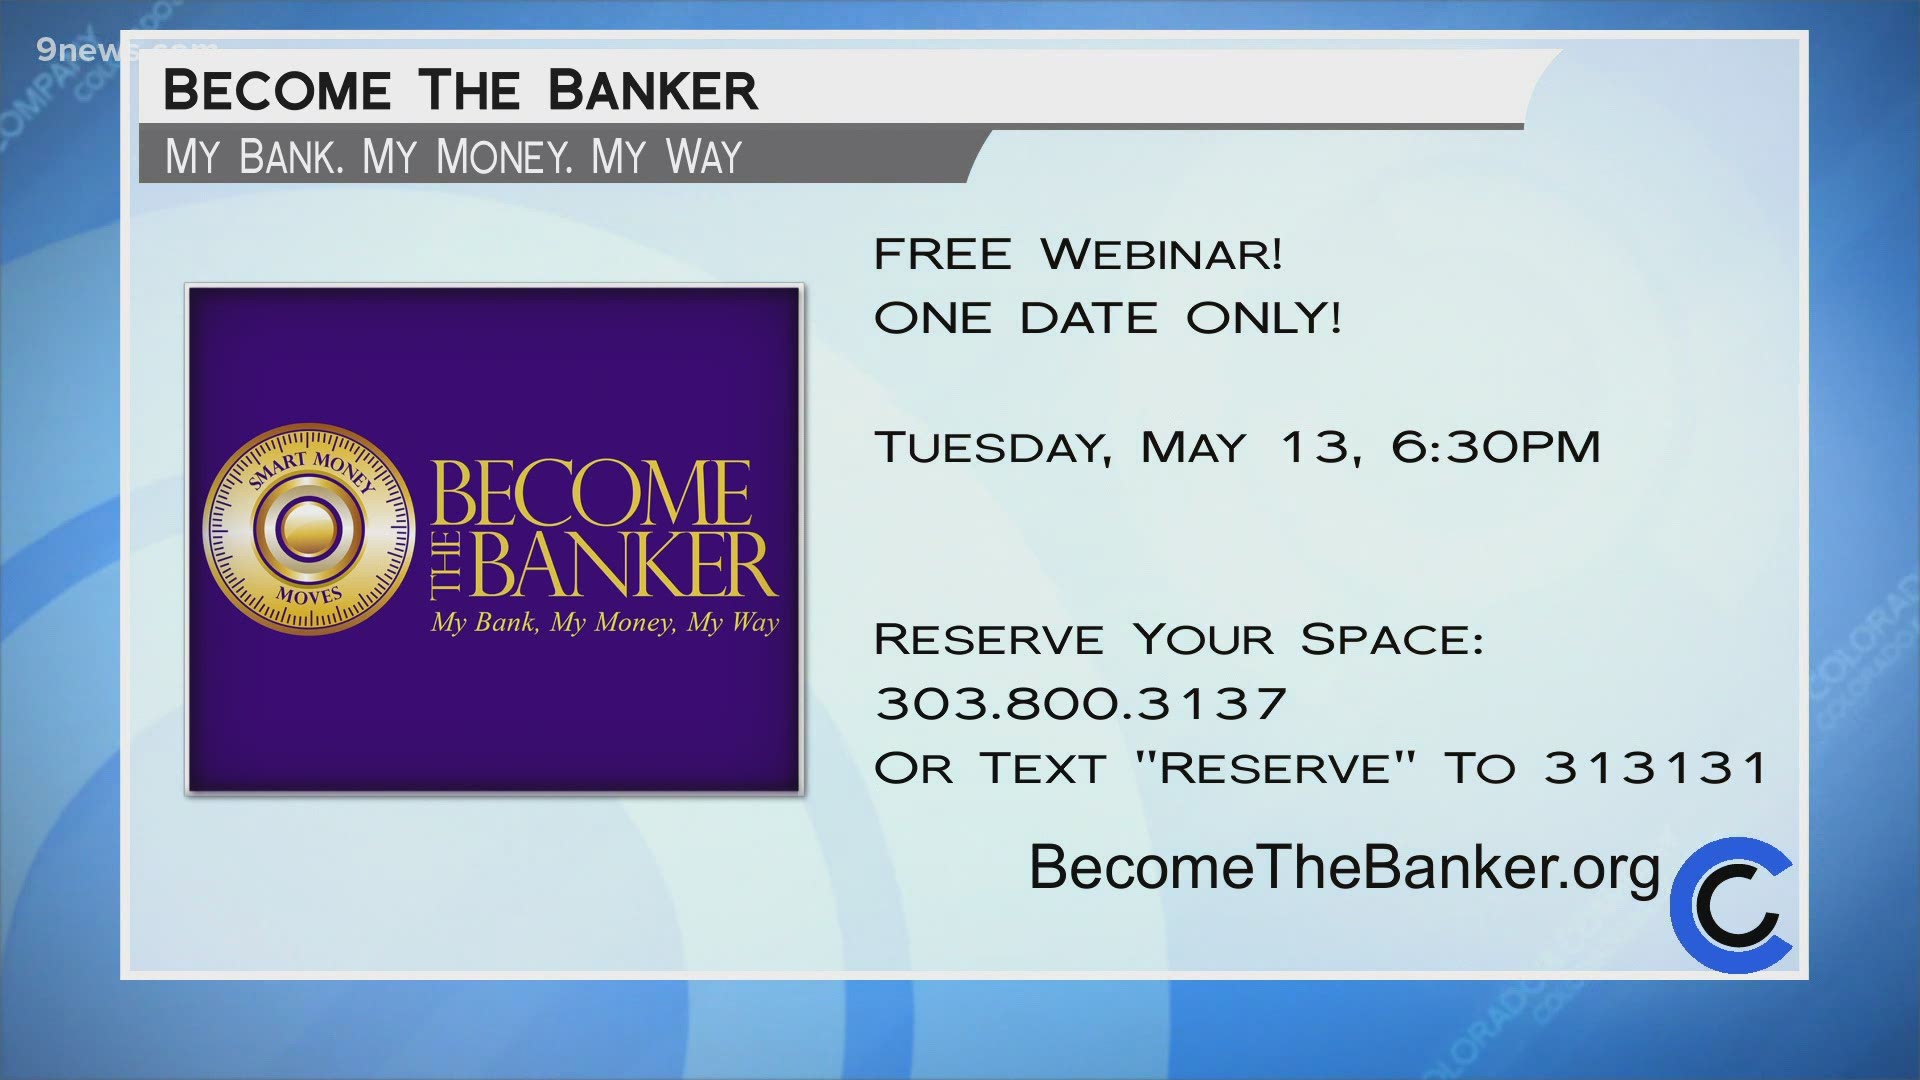 Register for the next Become the Banker webinar on May 13th at 6PM. Sign up at BecomeTheBanker.org.